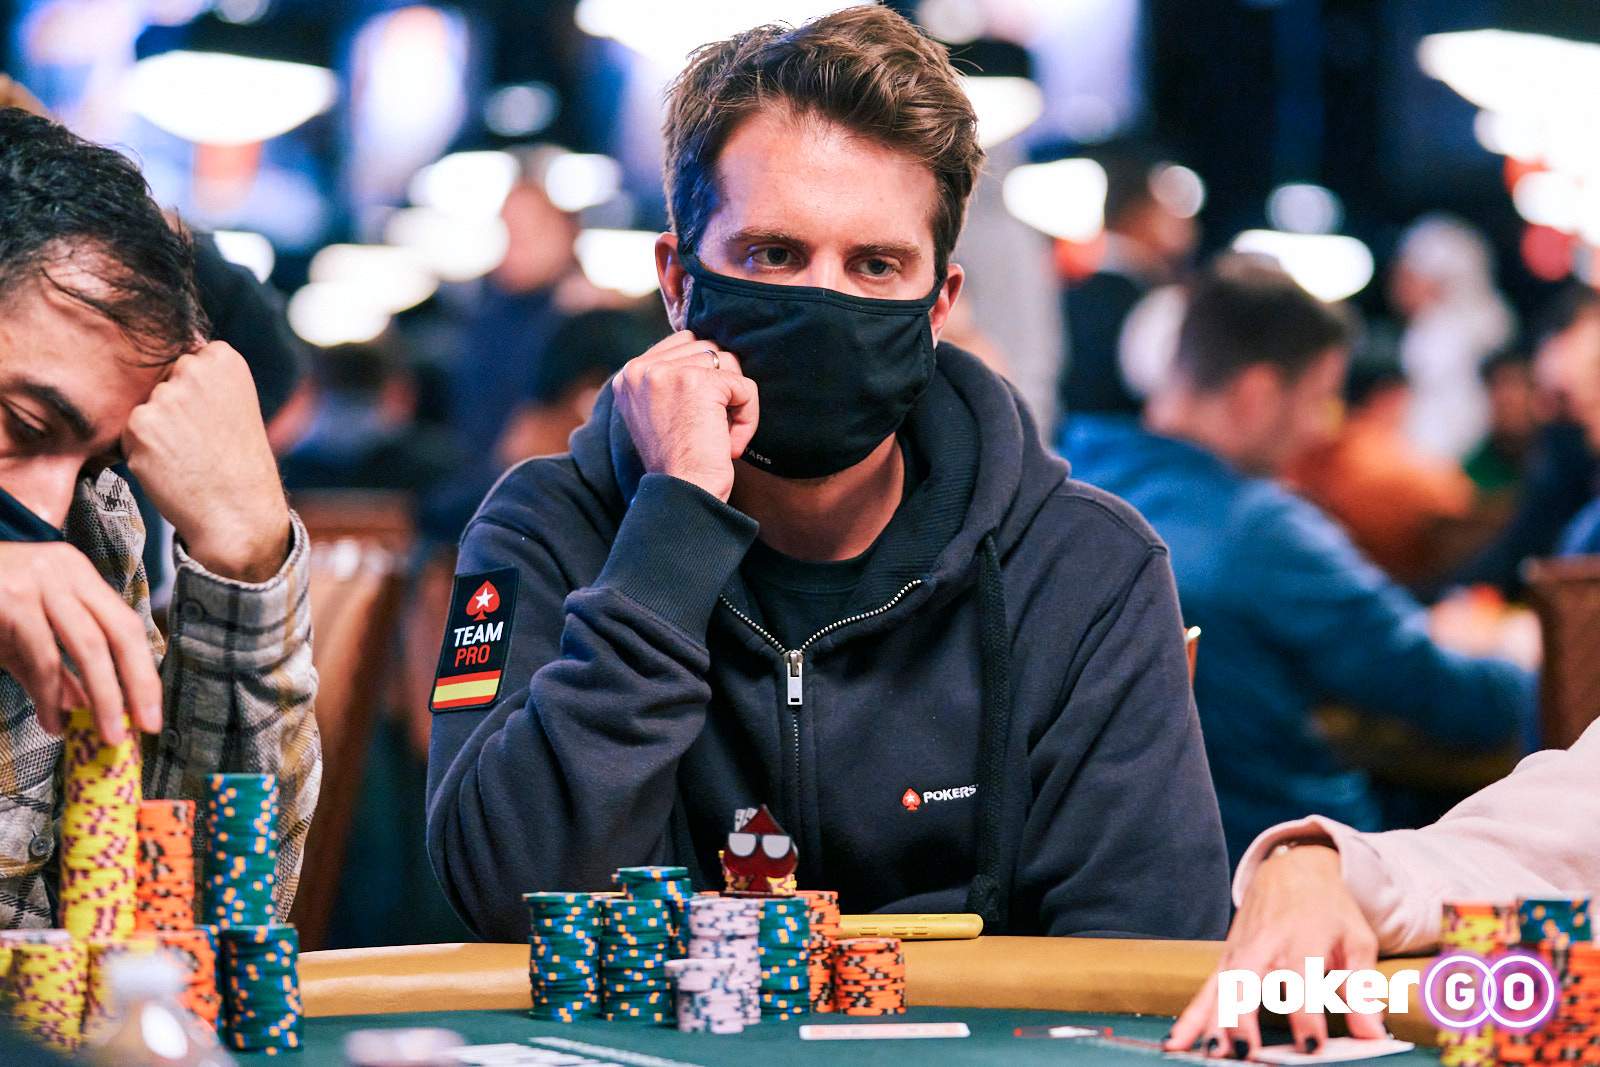 Storylines & Predictions for Day 5 of the 2021 WSOP Main Event